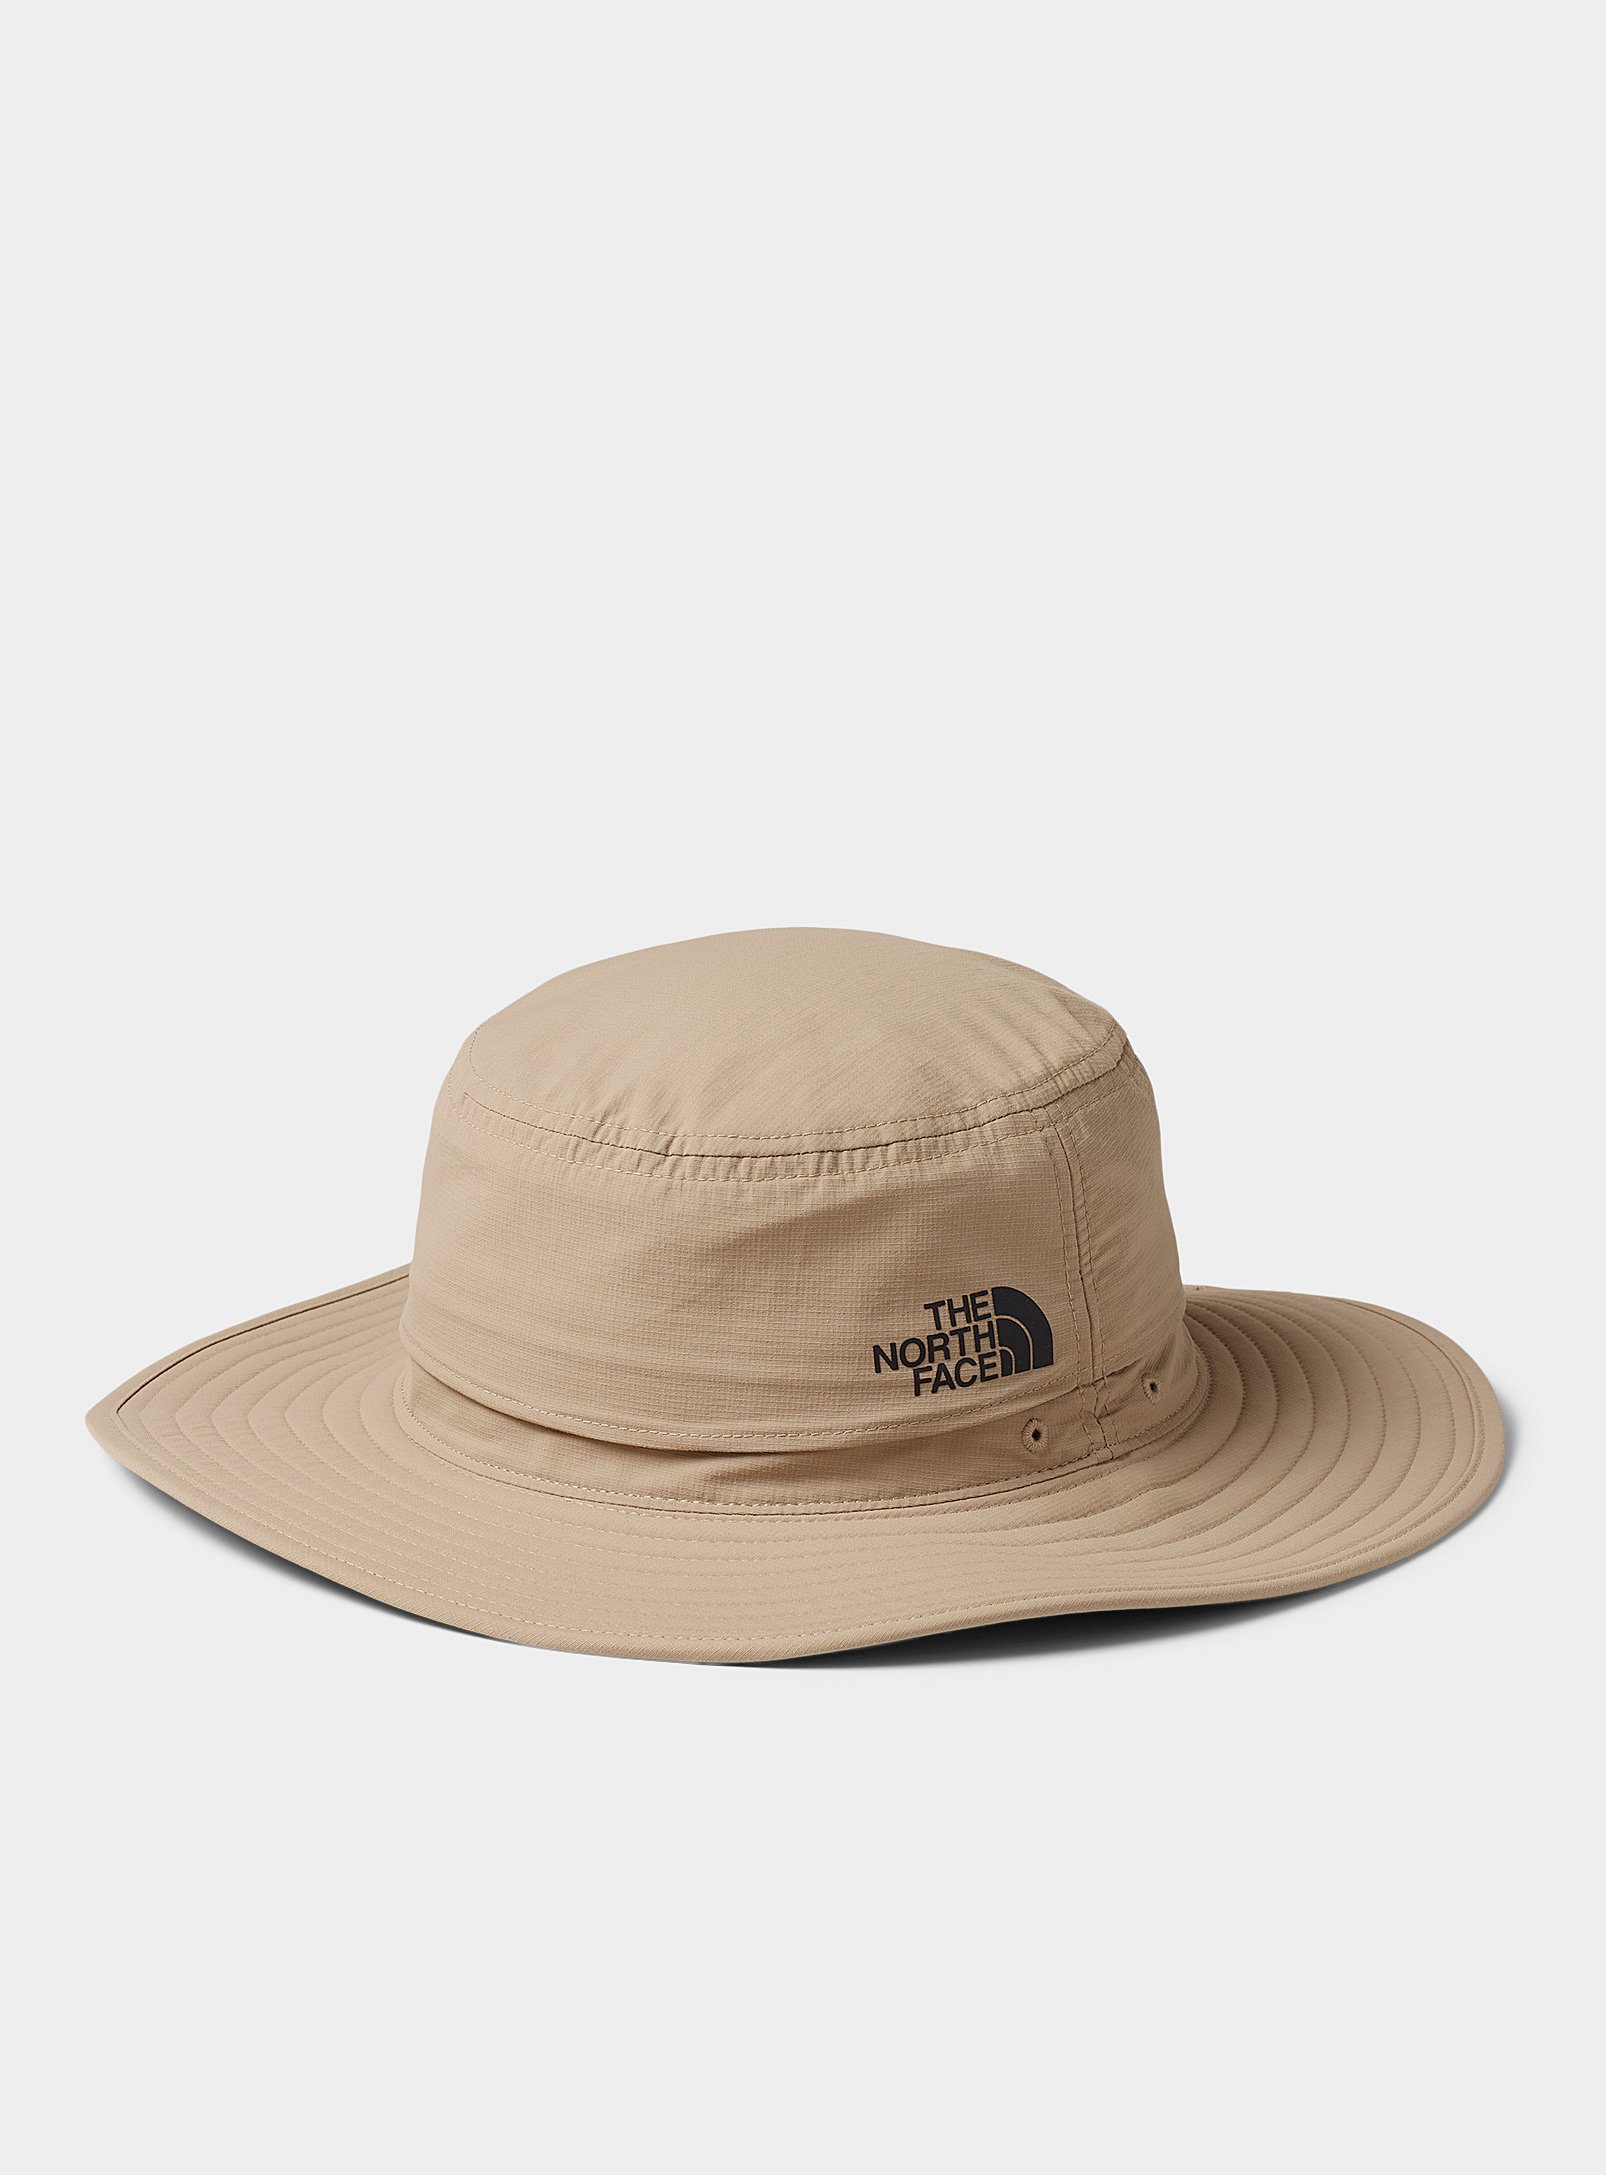 The North Face Utility Fisherman Hat In Cream Beige